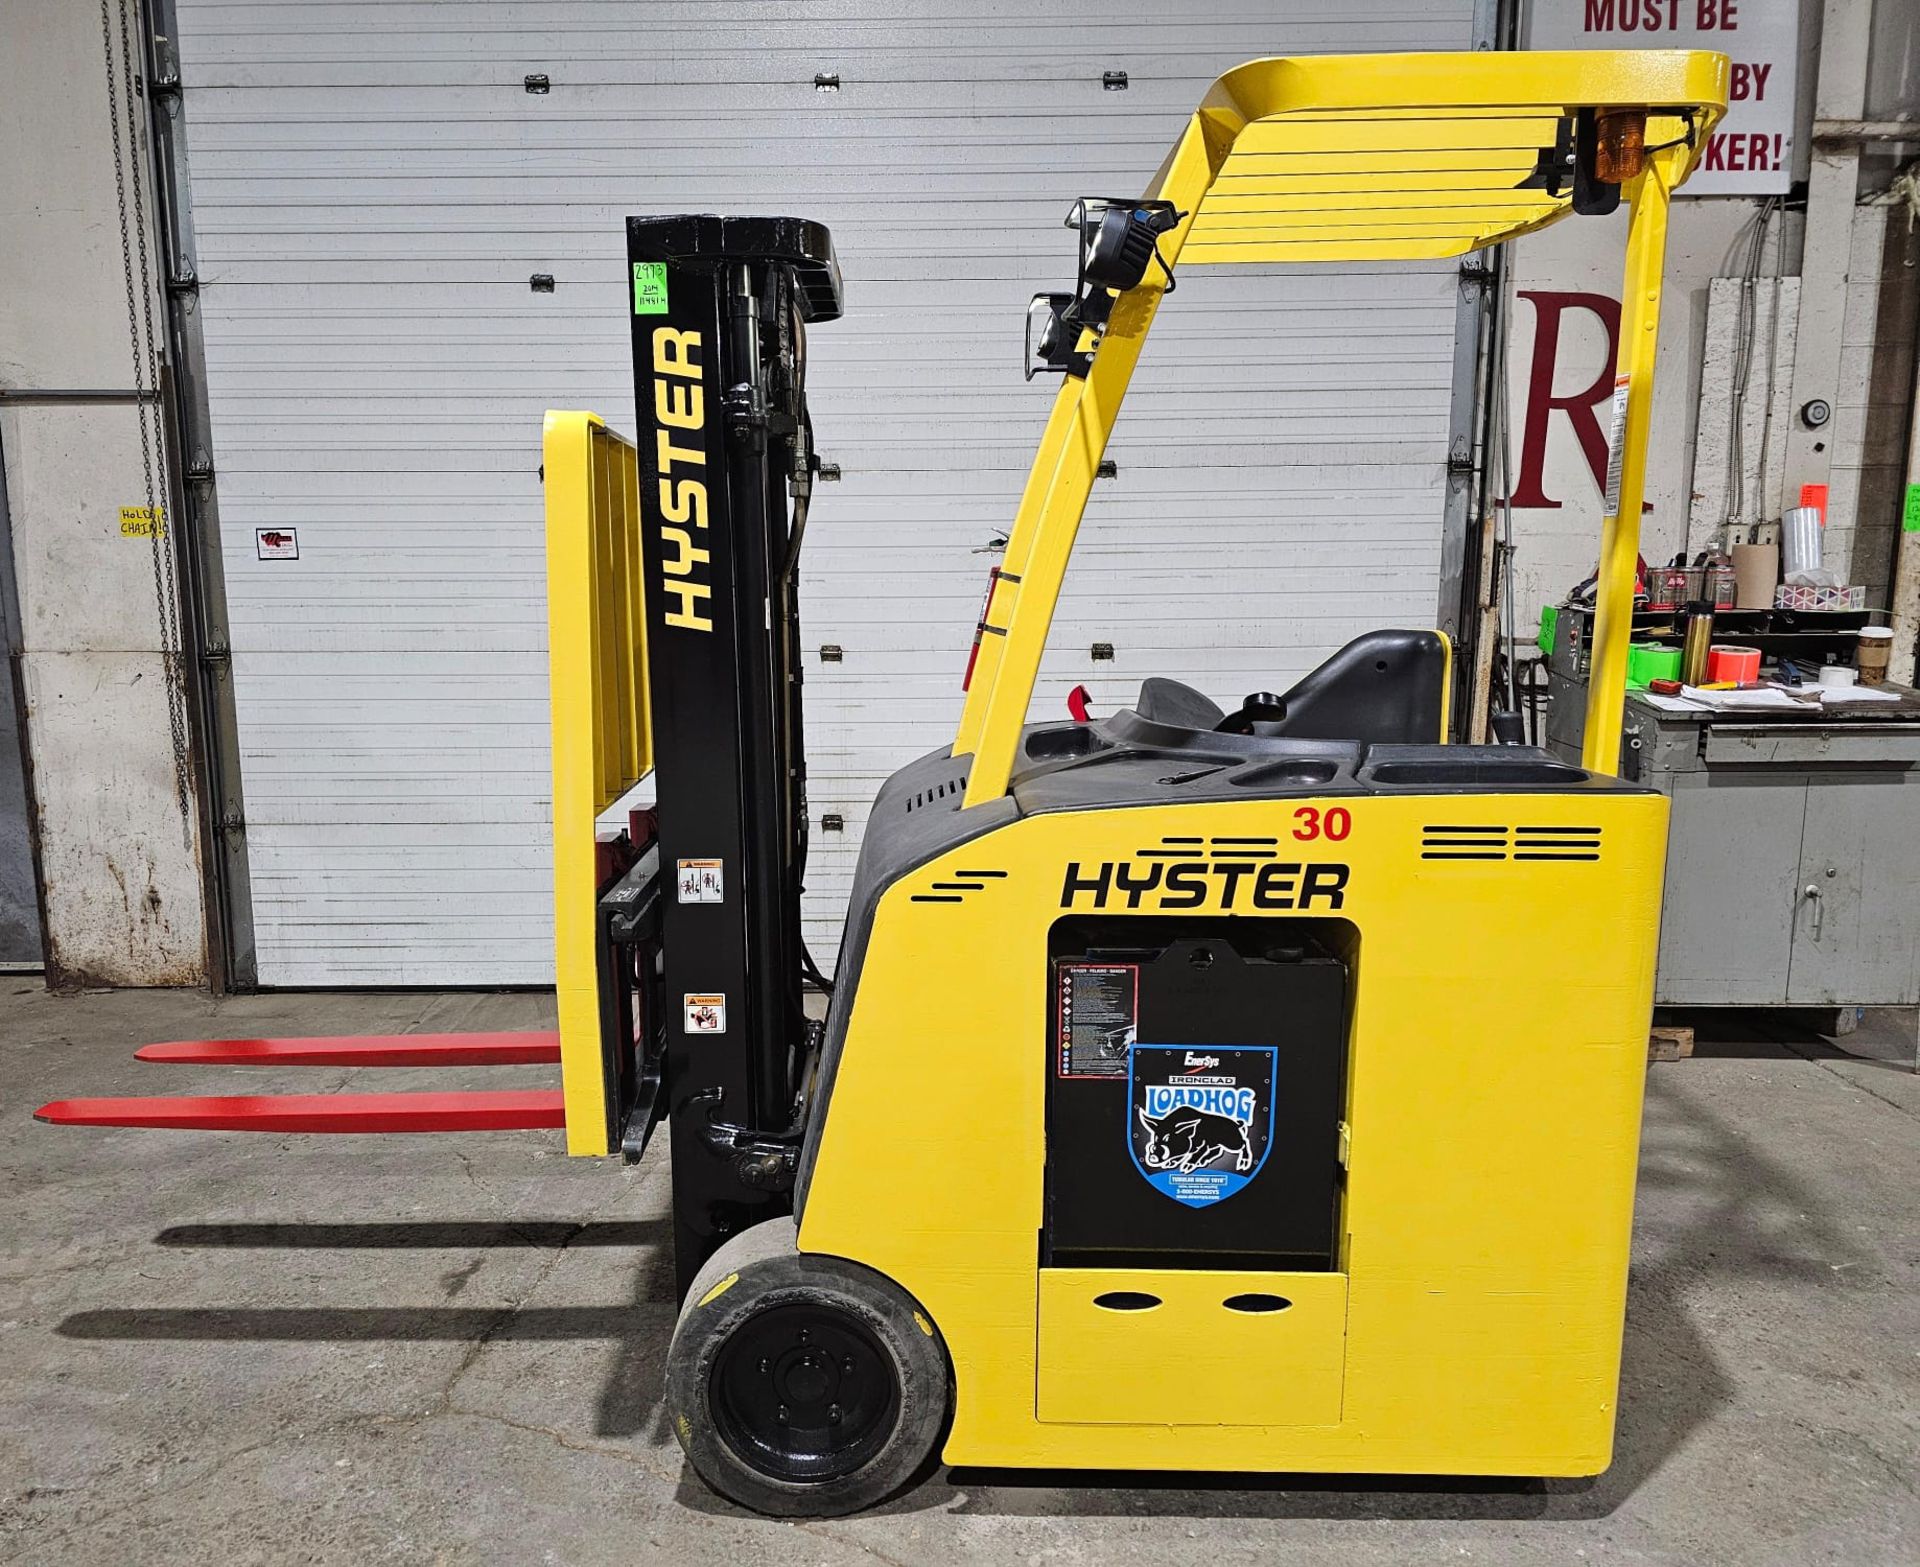 2014 Hyster 3,000lbs Capacity Stand-On Forklif 36V Battery 3-Stage Mast 187" load height , Sideshift